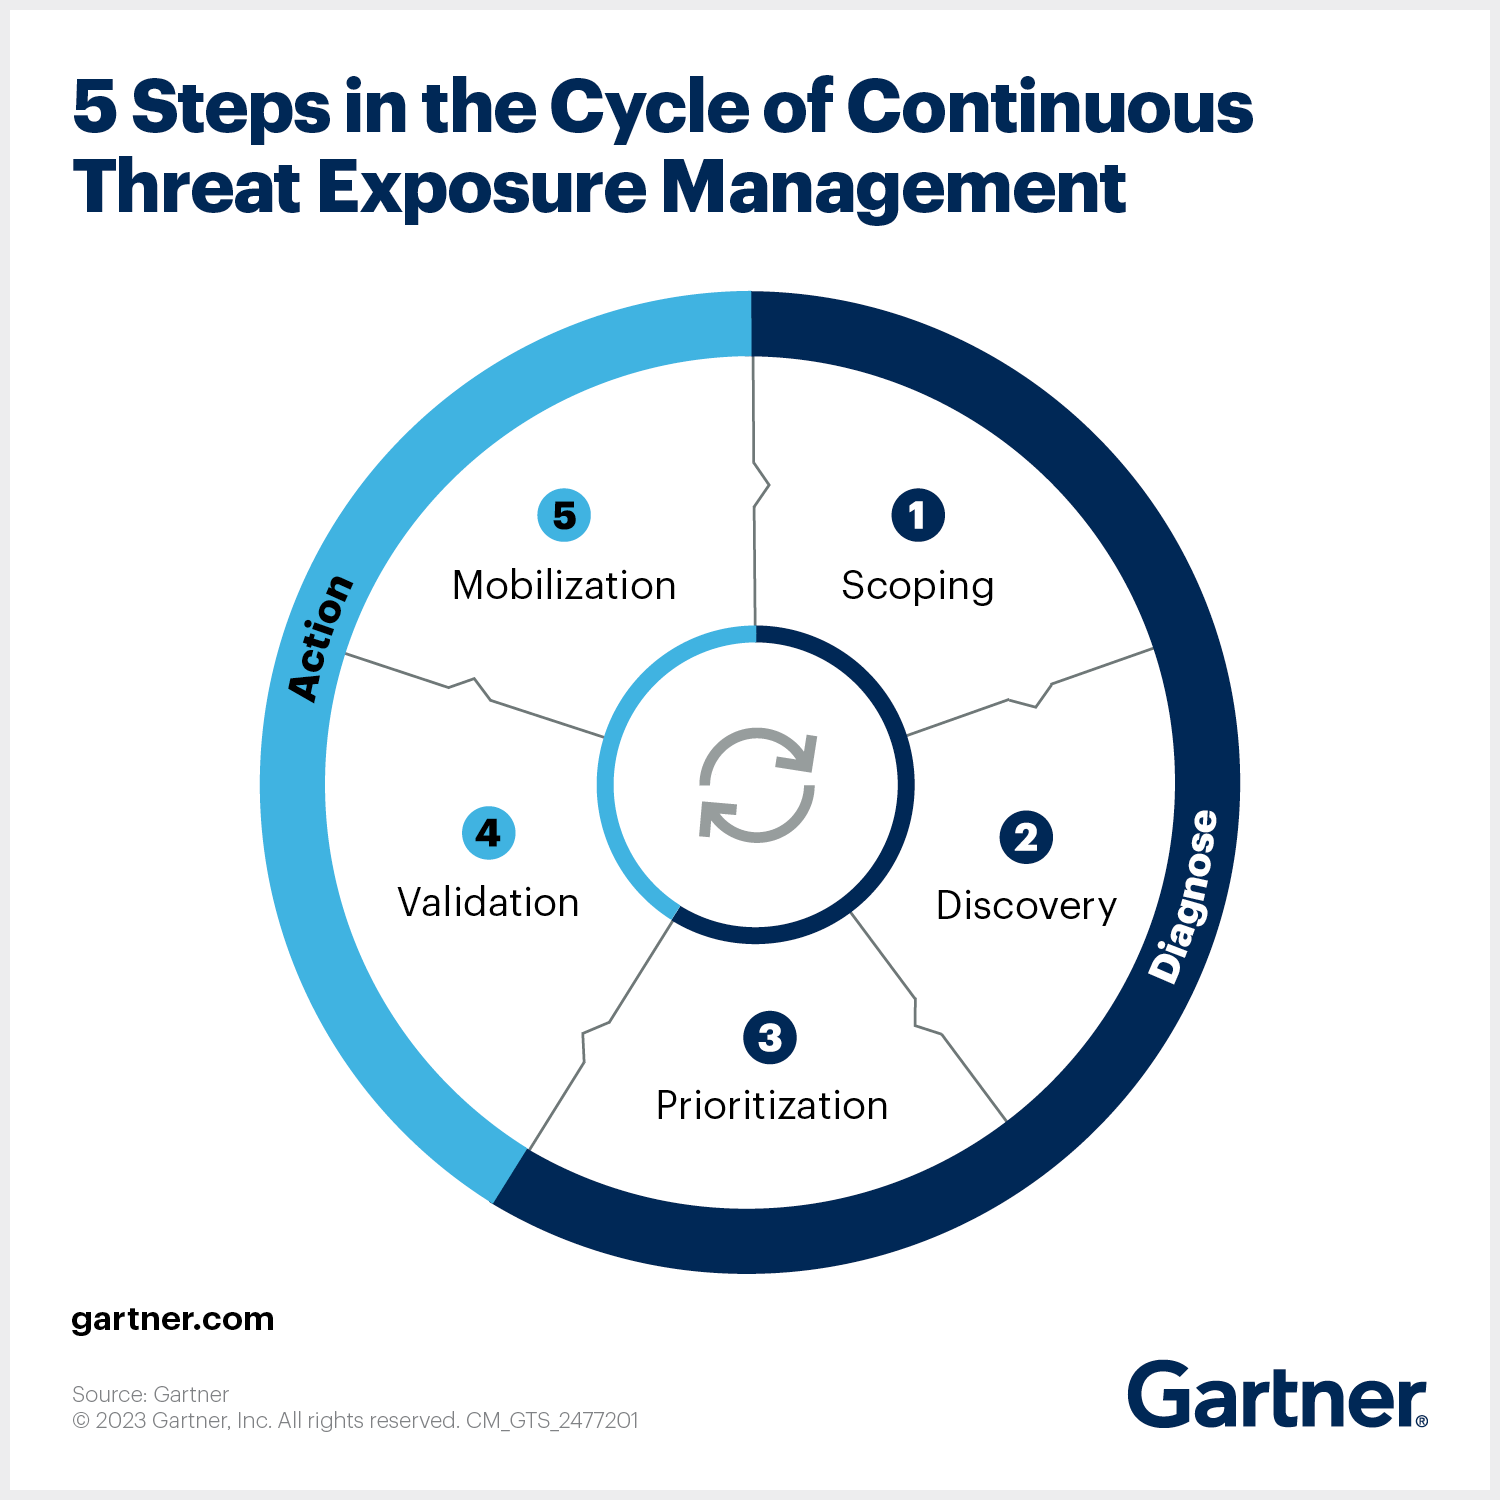 5 steps in cycly of continous threat exposure management